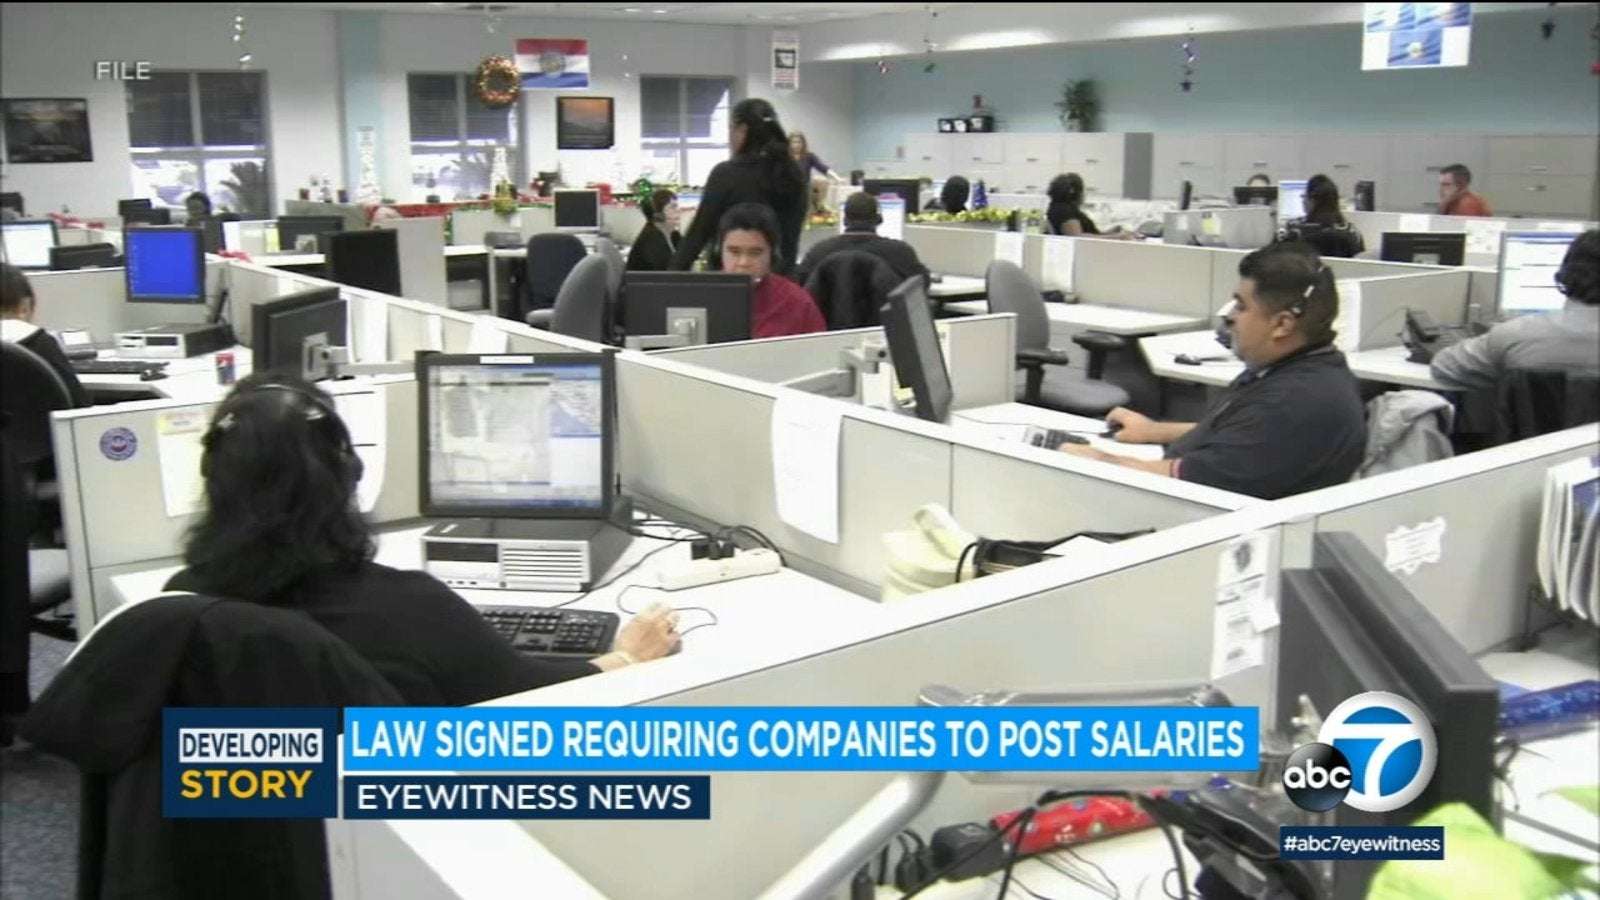 image for California employers will be required to post salaries for job listings under new law